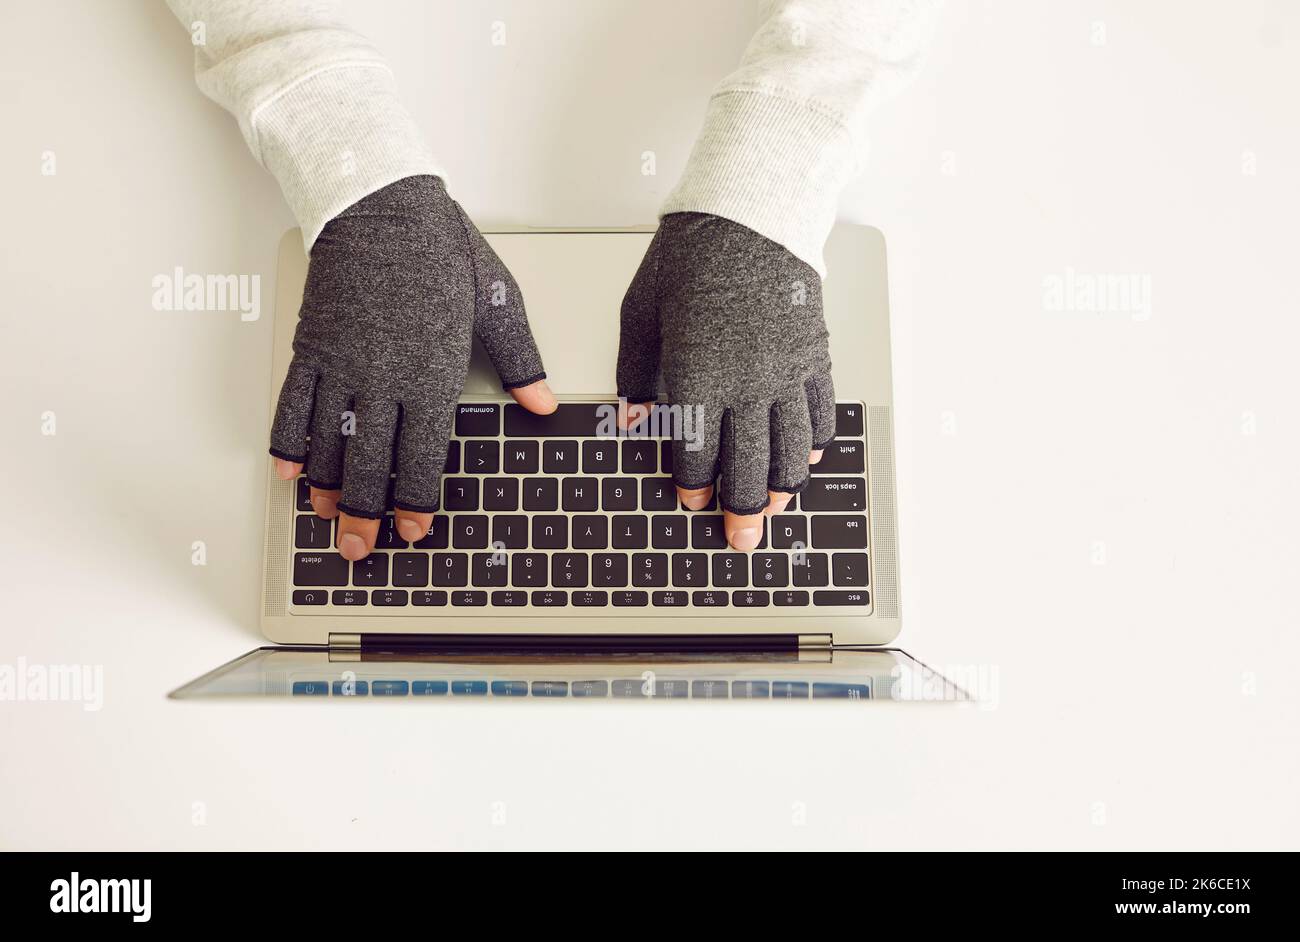 Man with rheumatoid arthritis working on laptop wearing compression gloves for easing pain Stock Photo